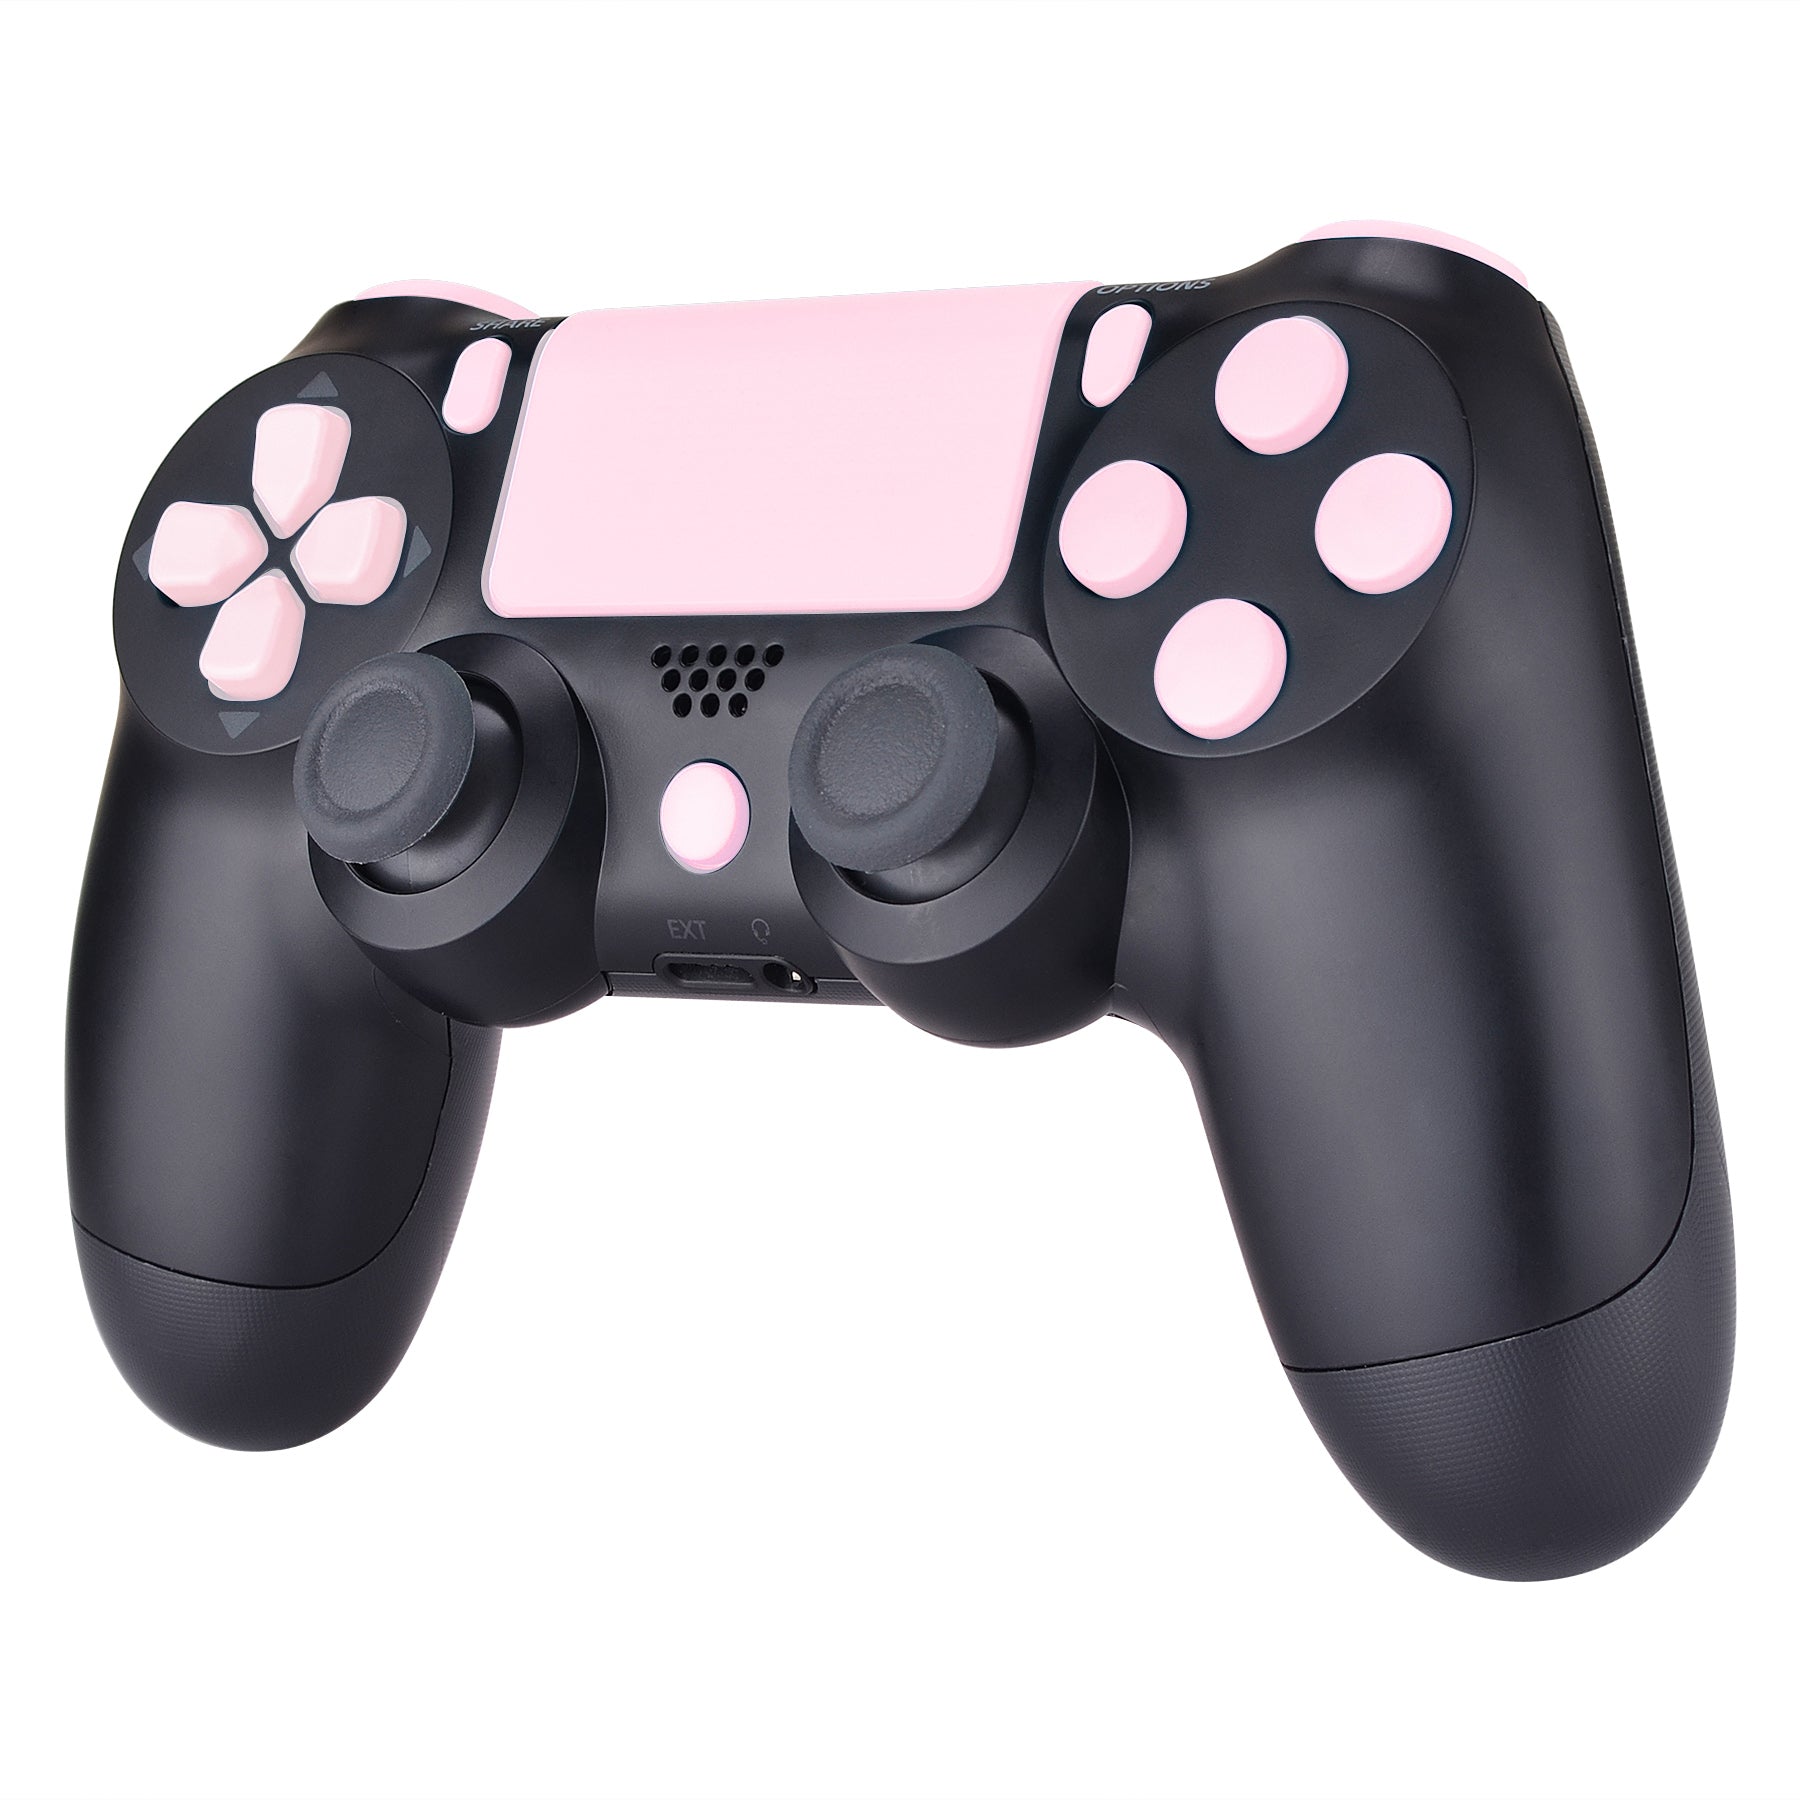 eXtremeRate Replacement D-pad R1 L1 R2 Share for Triggers ps4 for Touchpad Buttons Controller Kit Pink Slim Controller, ps4 Buttons Action Options Set Full Home – eXtremeRate Repair Blossoms L2 Cherry Pro